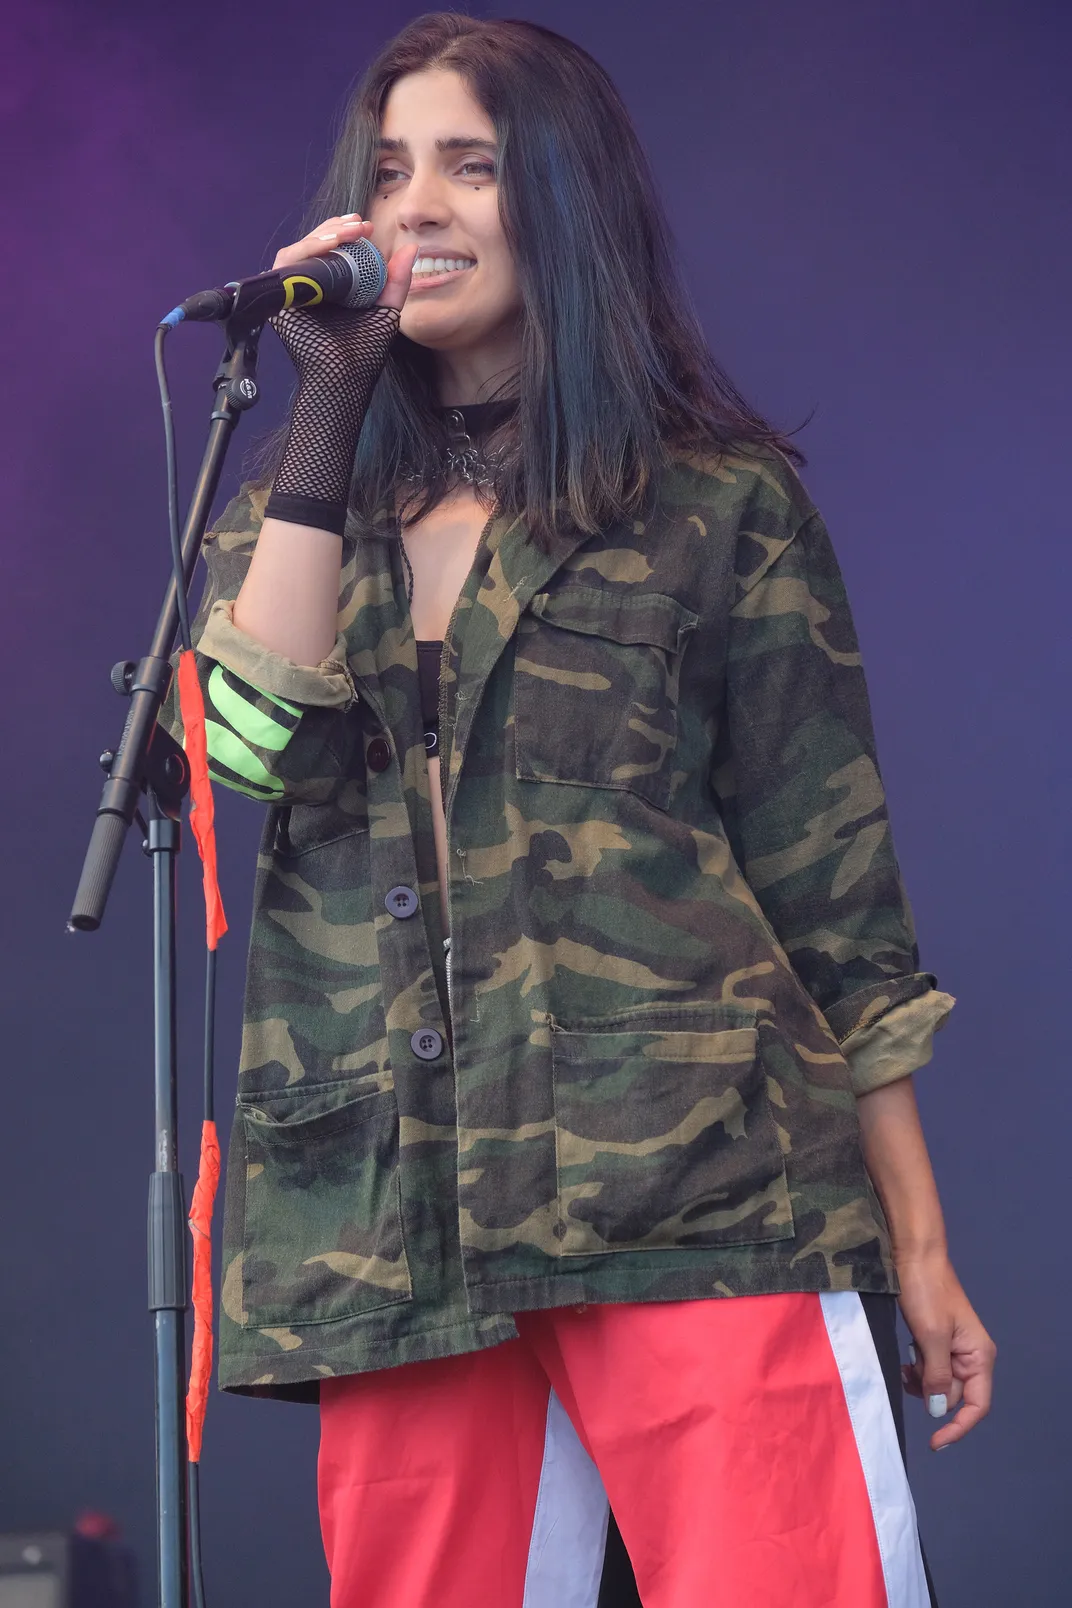 young Russian girl in red pants and camouflage jacket singing into microphone